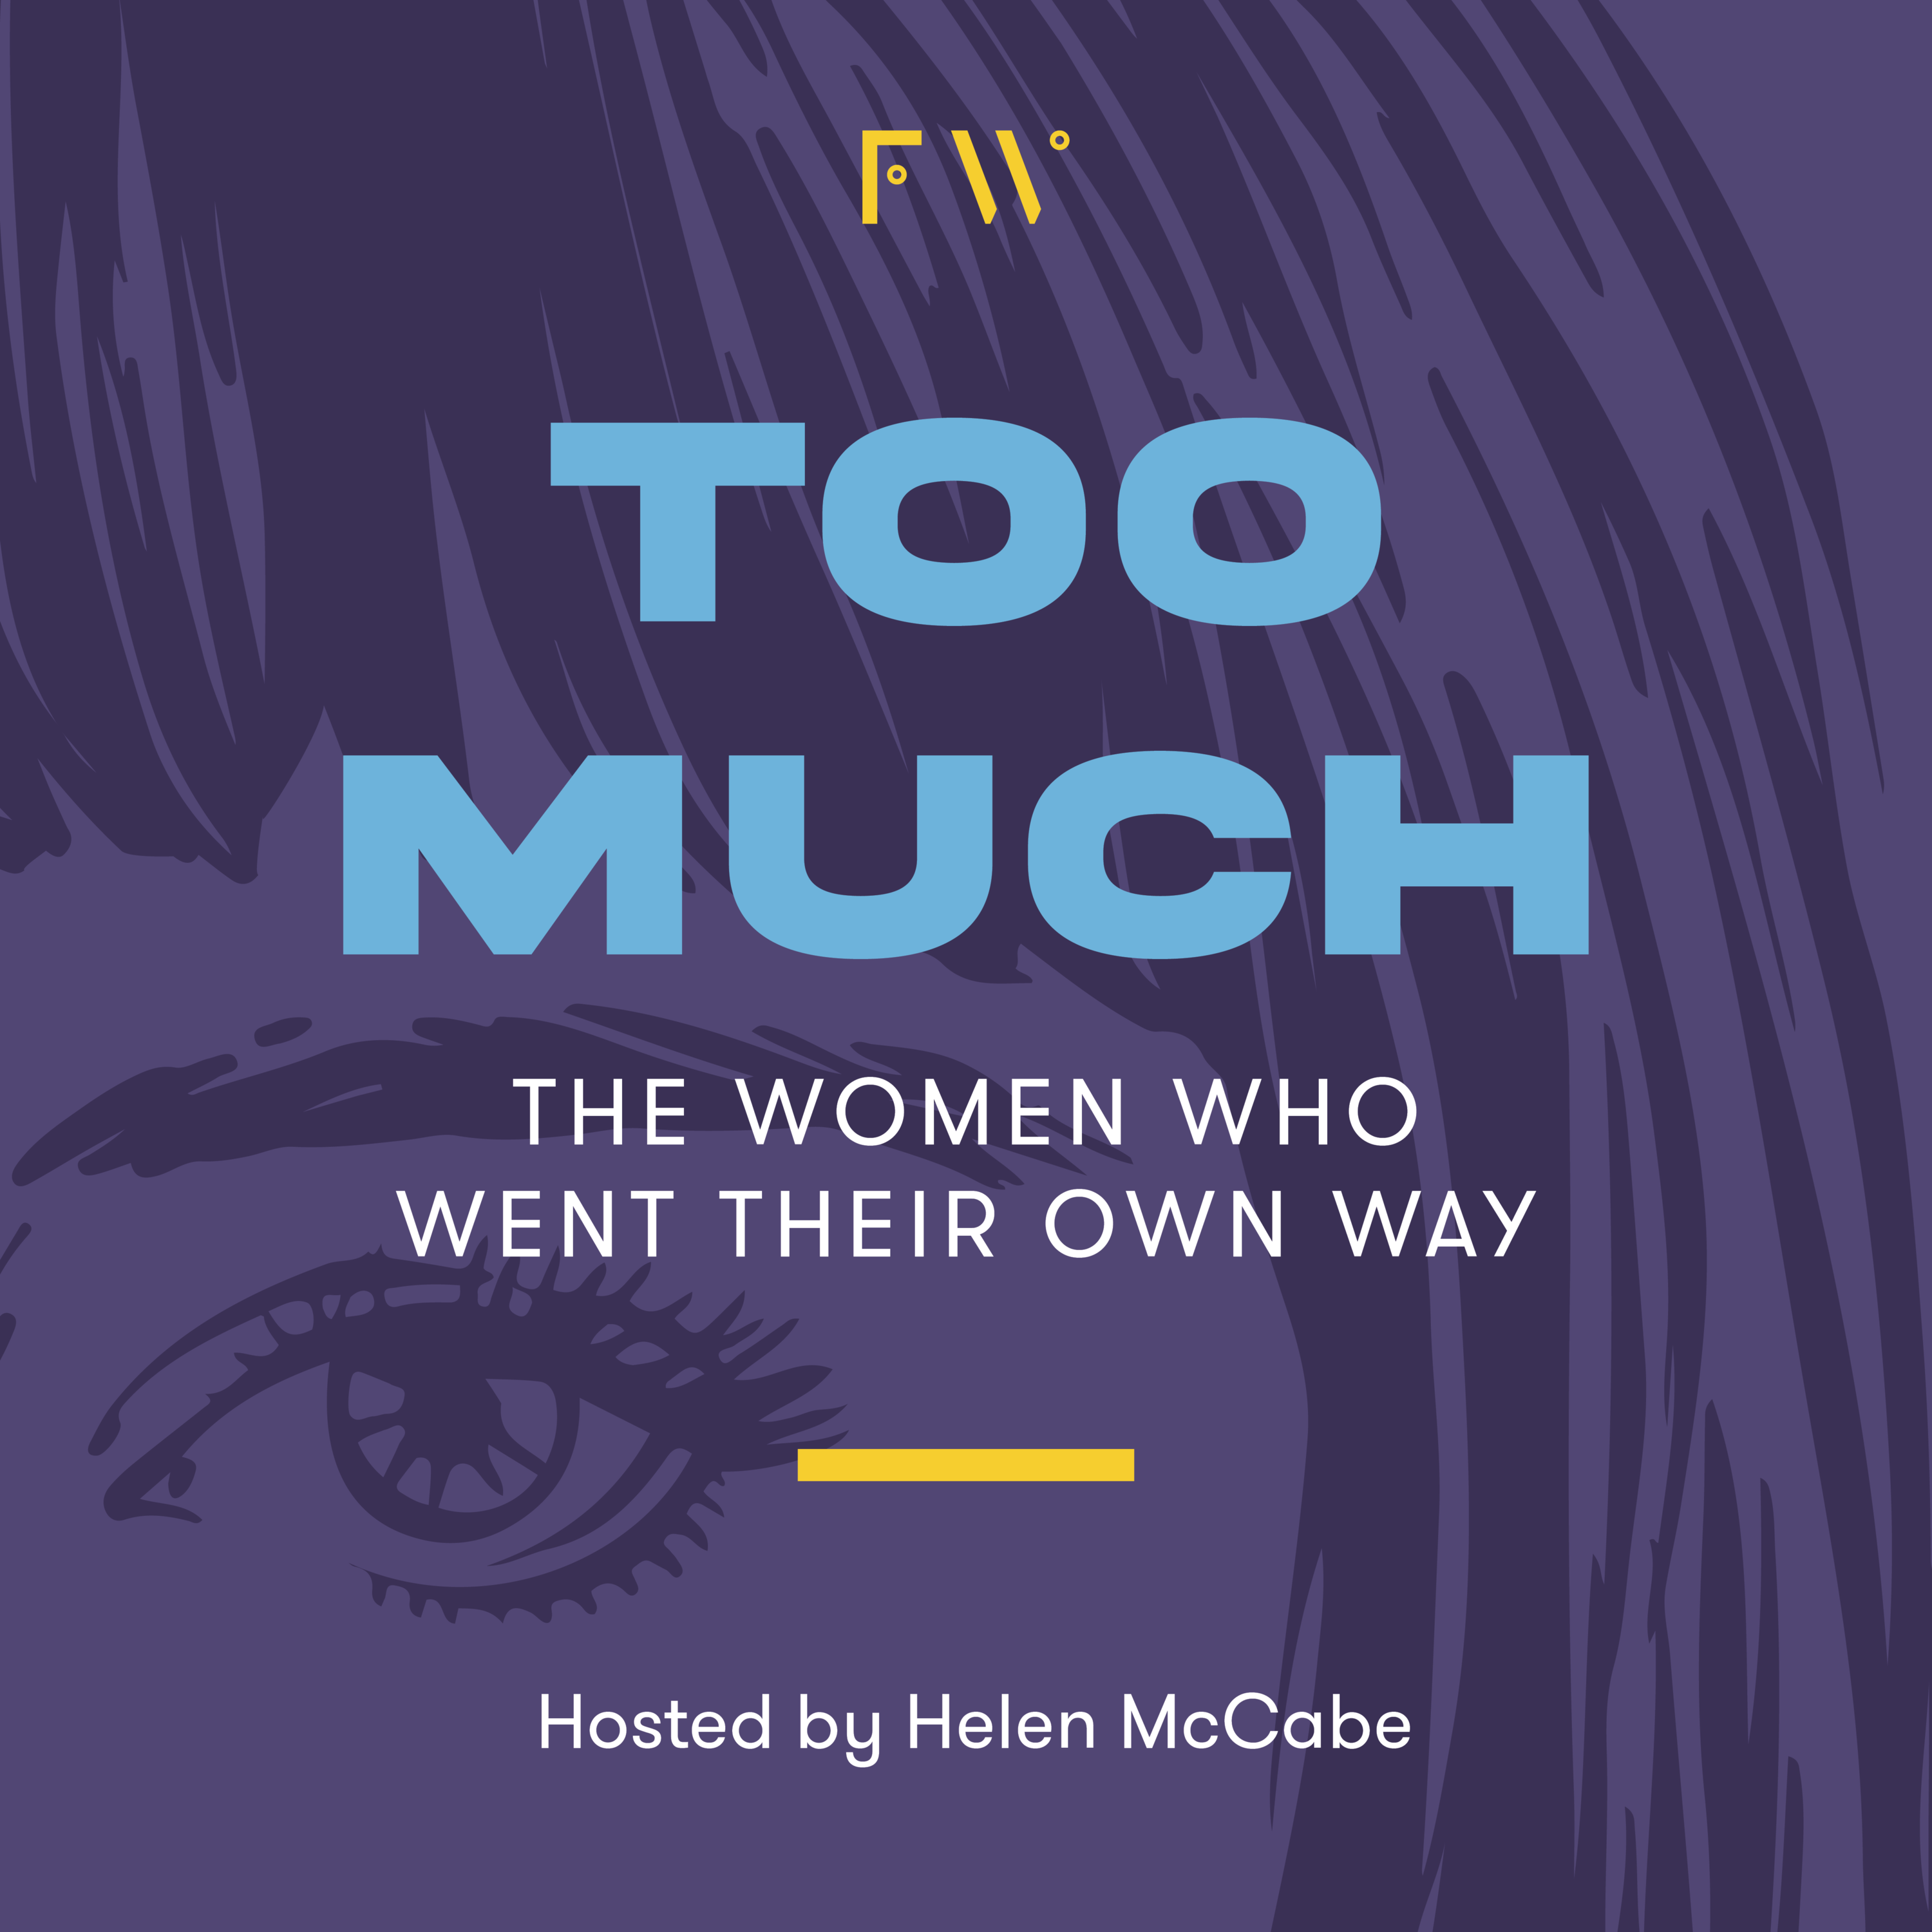 A new podcast for women who are told they're "too much".